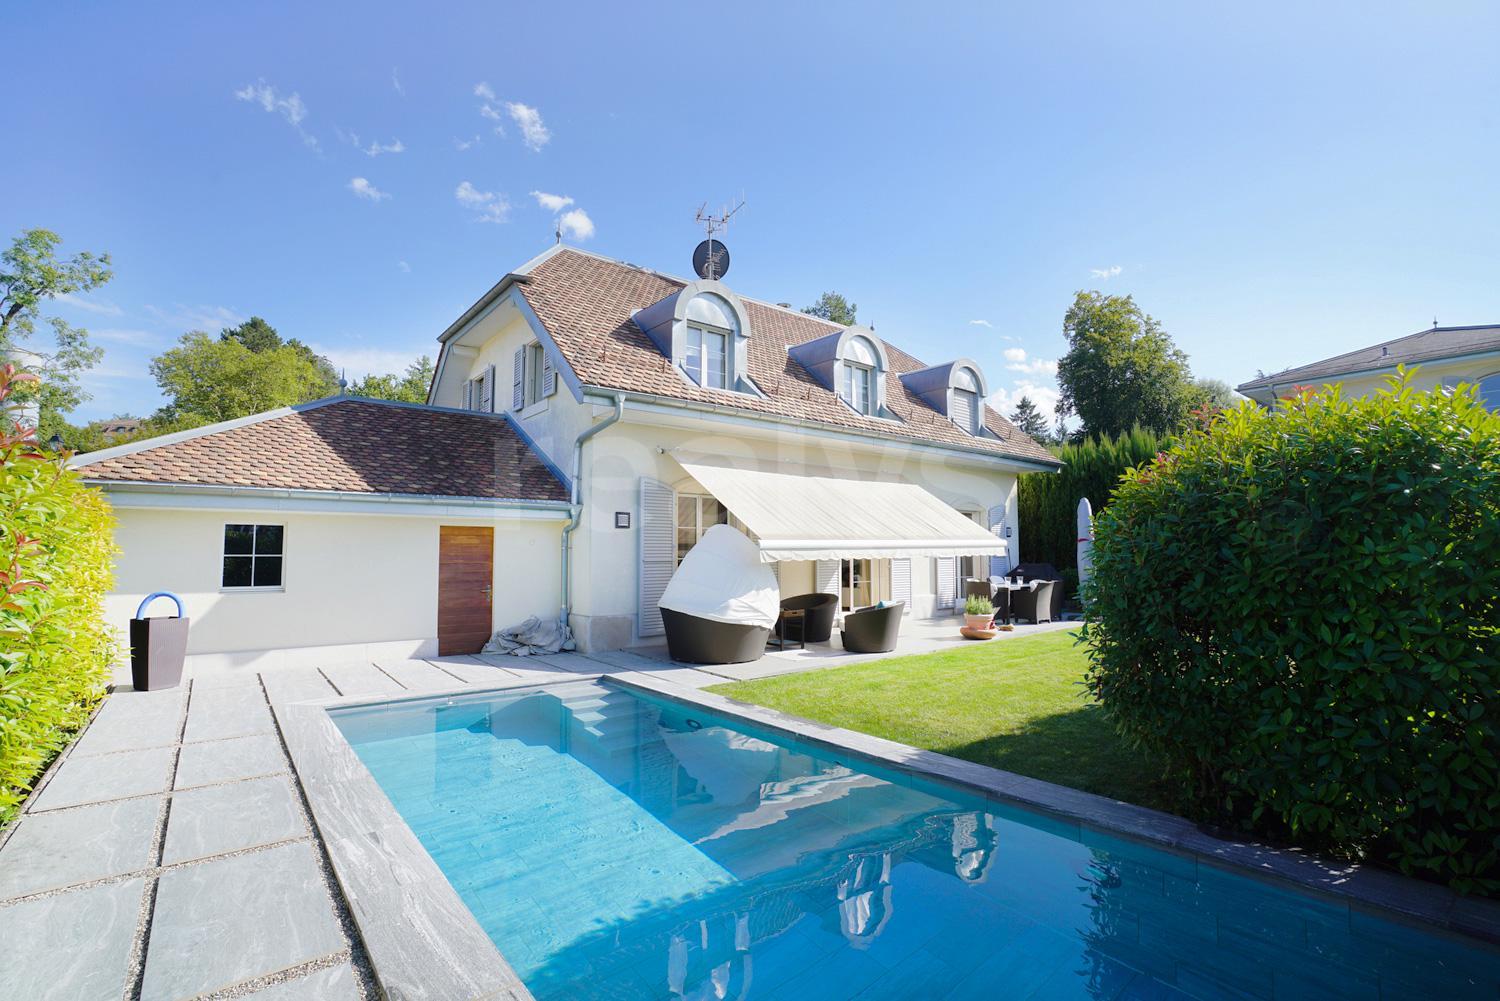 PrivaliaUnique : Exceptional villa with pool on the heights of Cologny